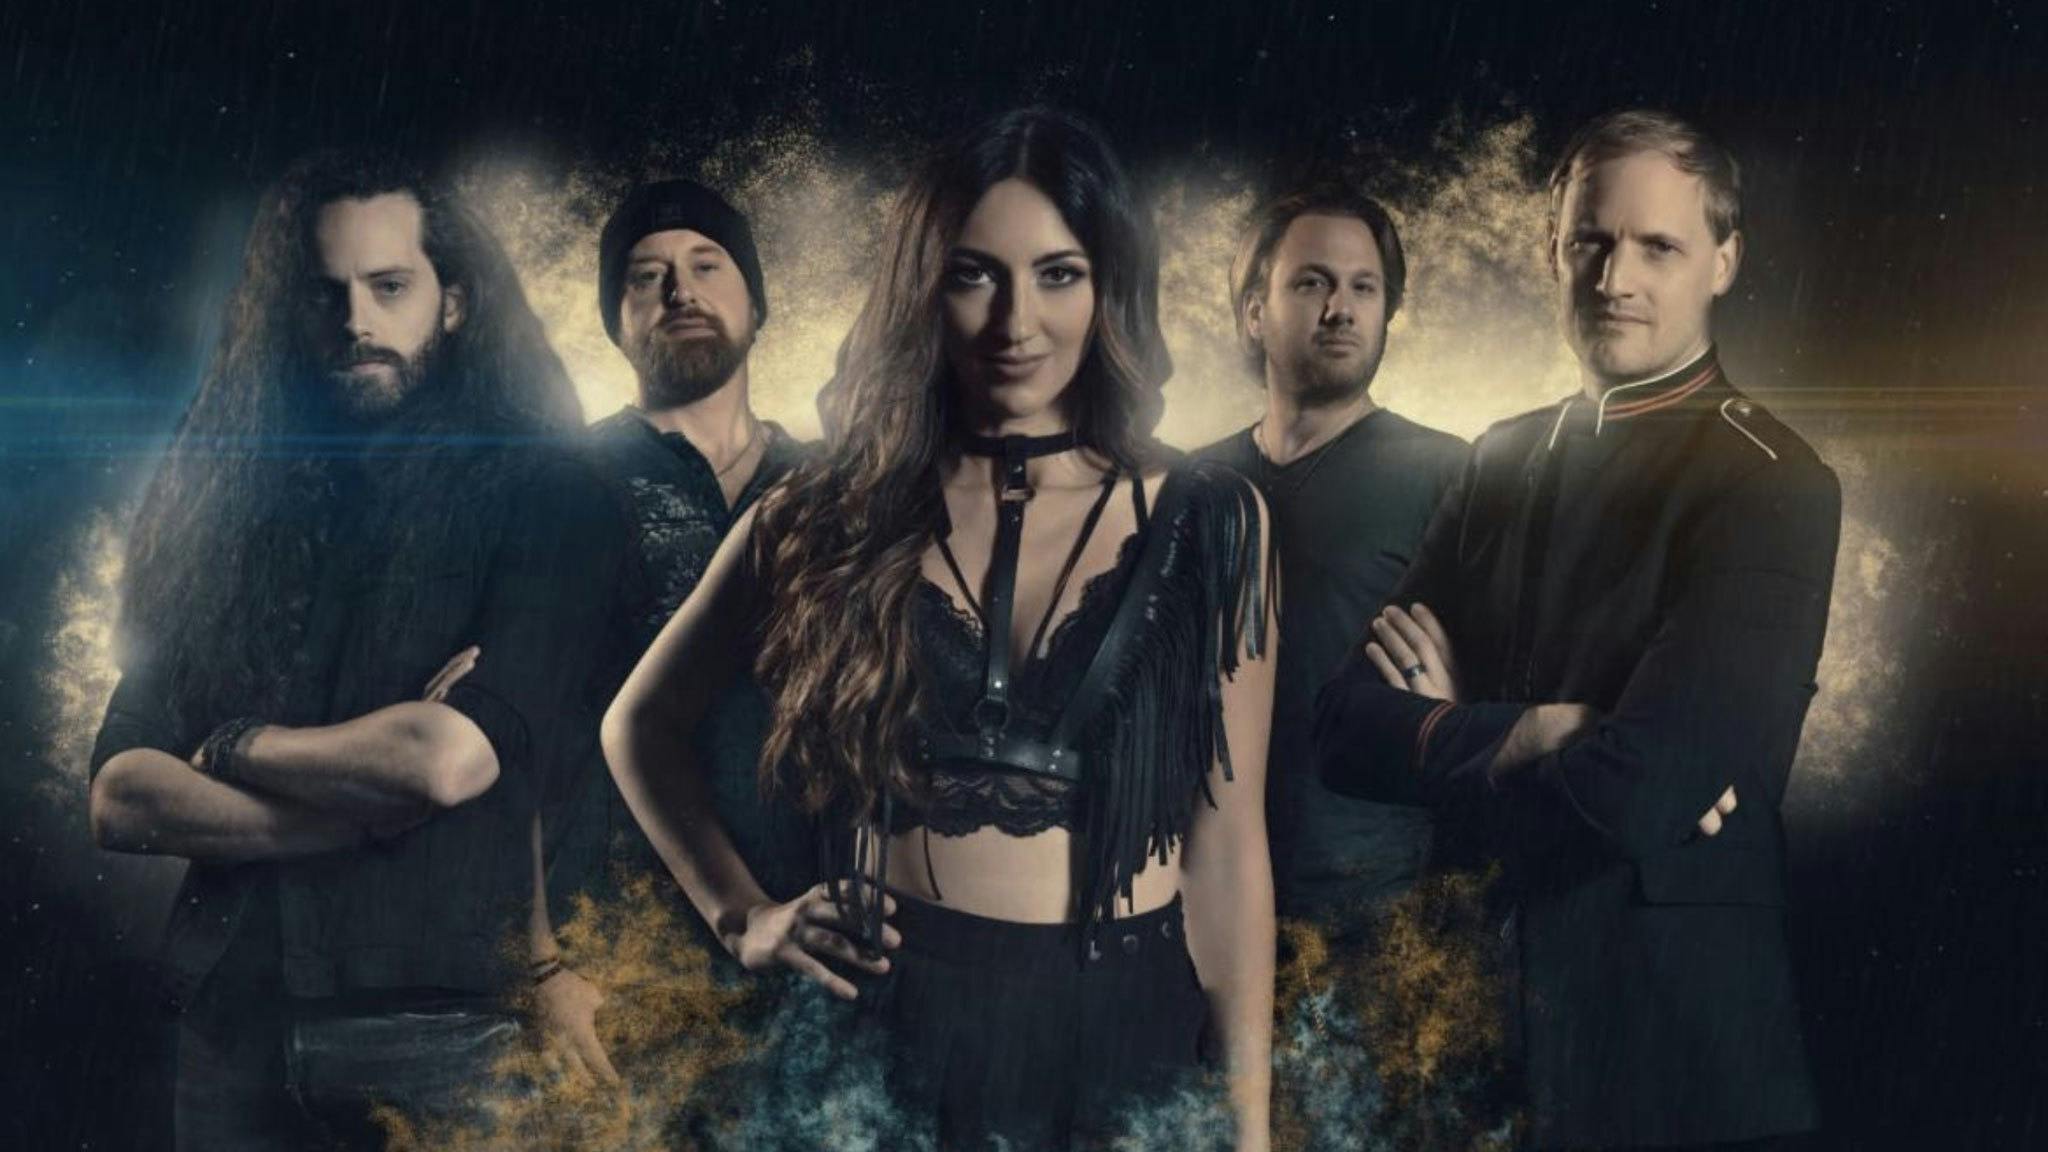 Delain introduce vocalist Diana Leah with new single Beneath